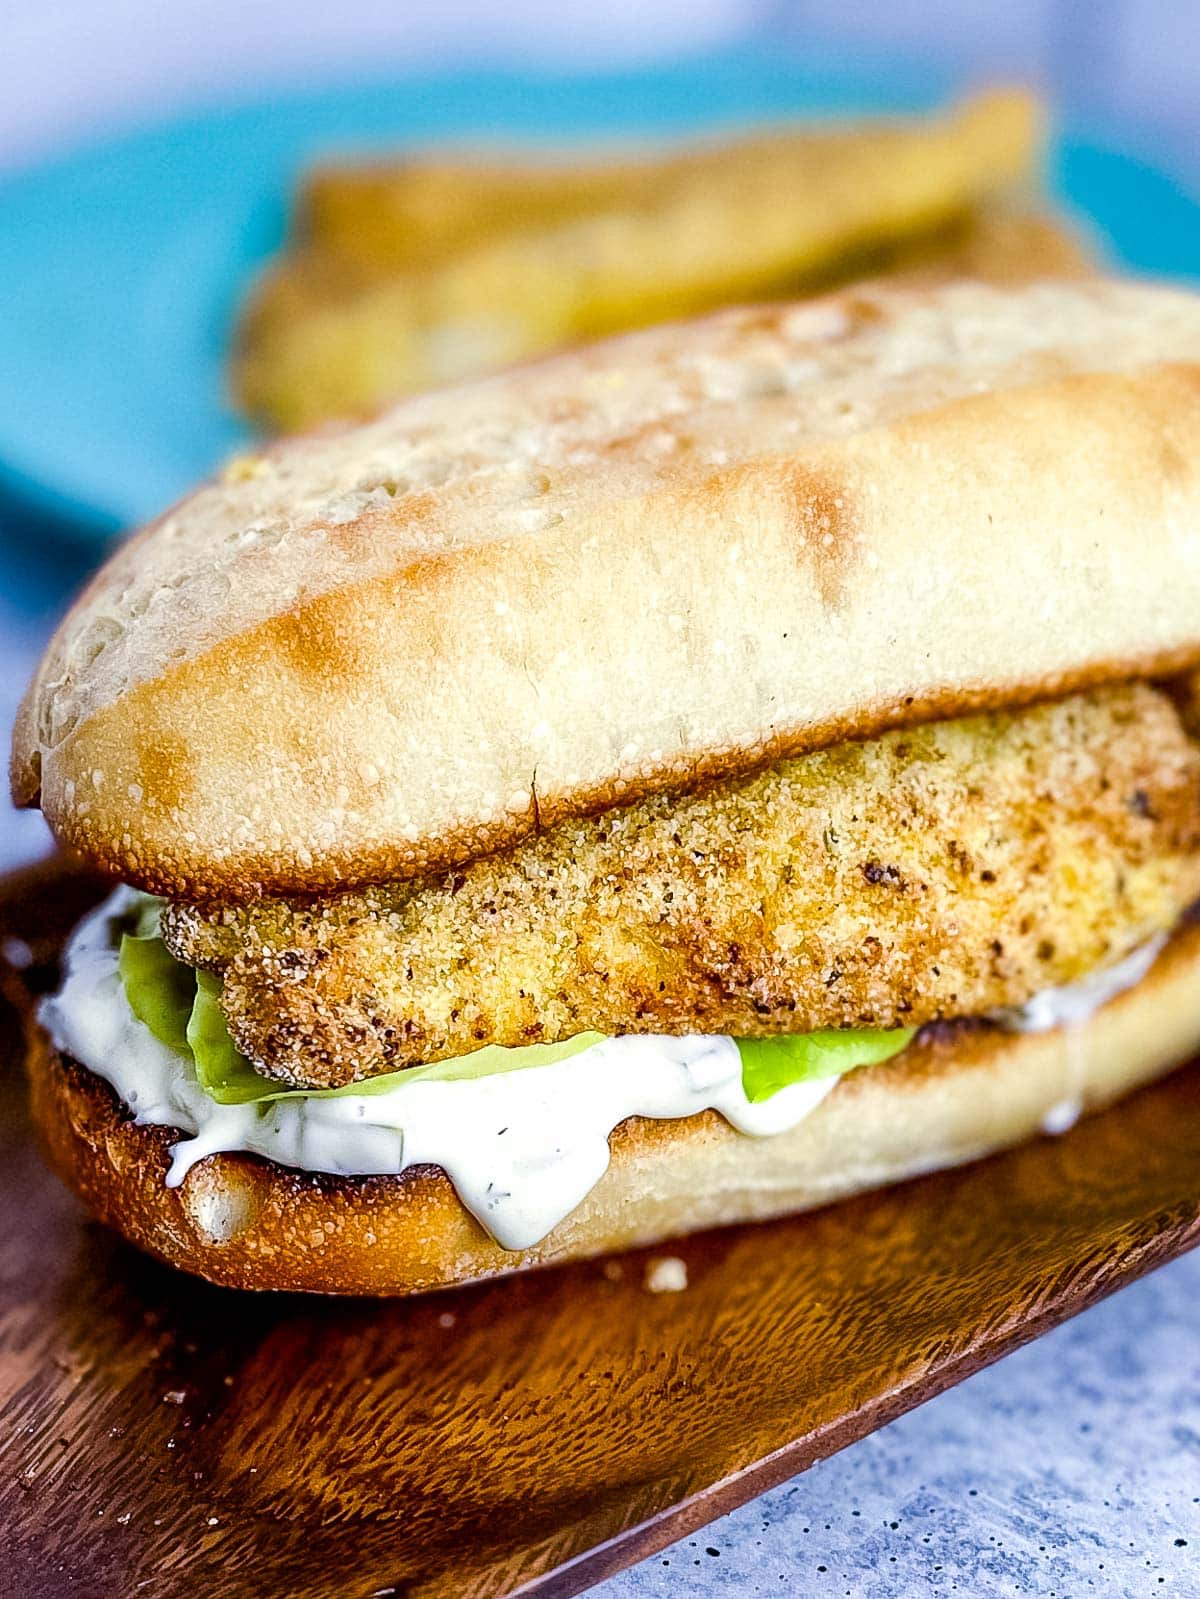 A fish sandwich made with air fryer fish sticks on a brown tray.